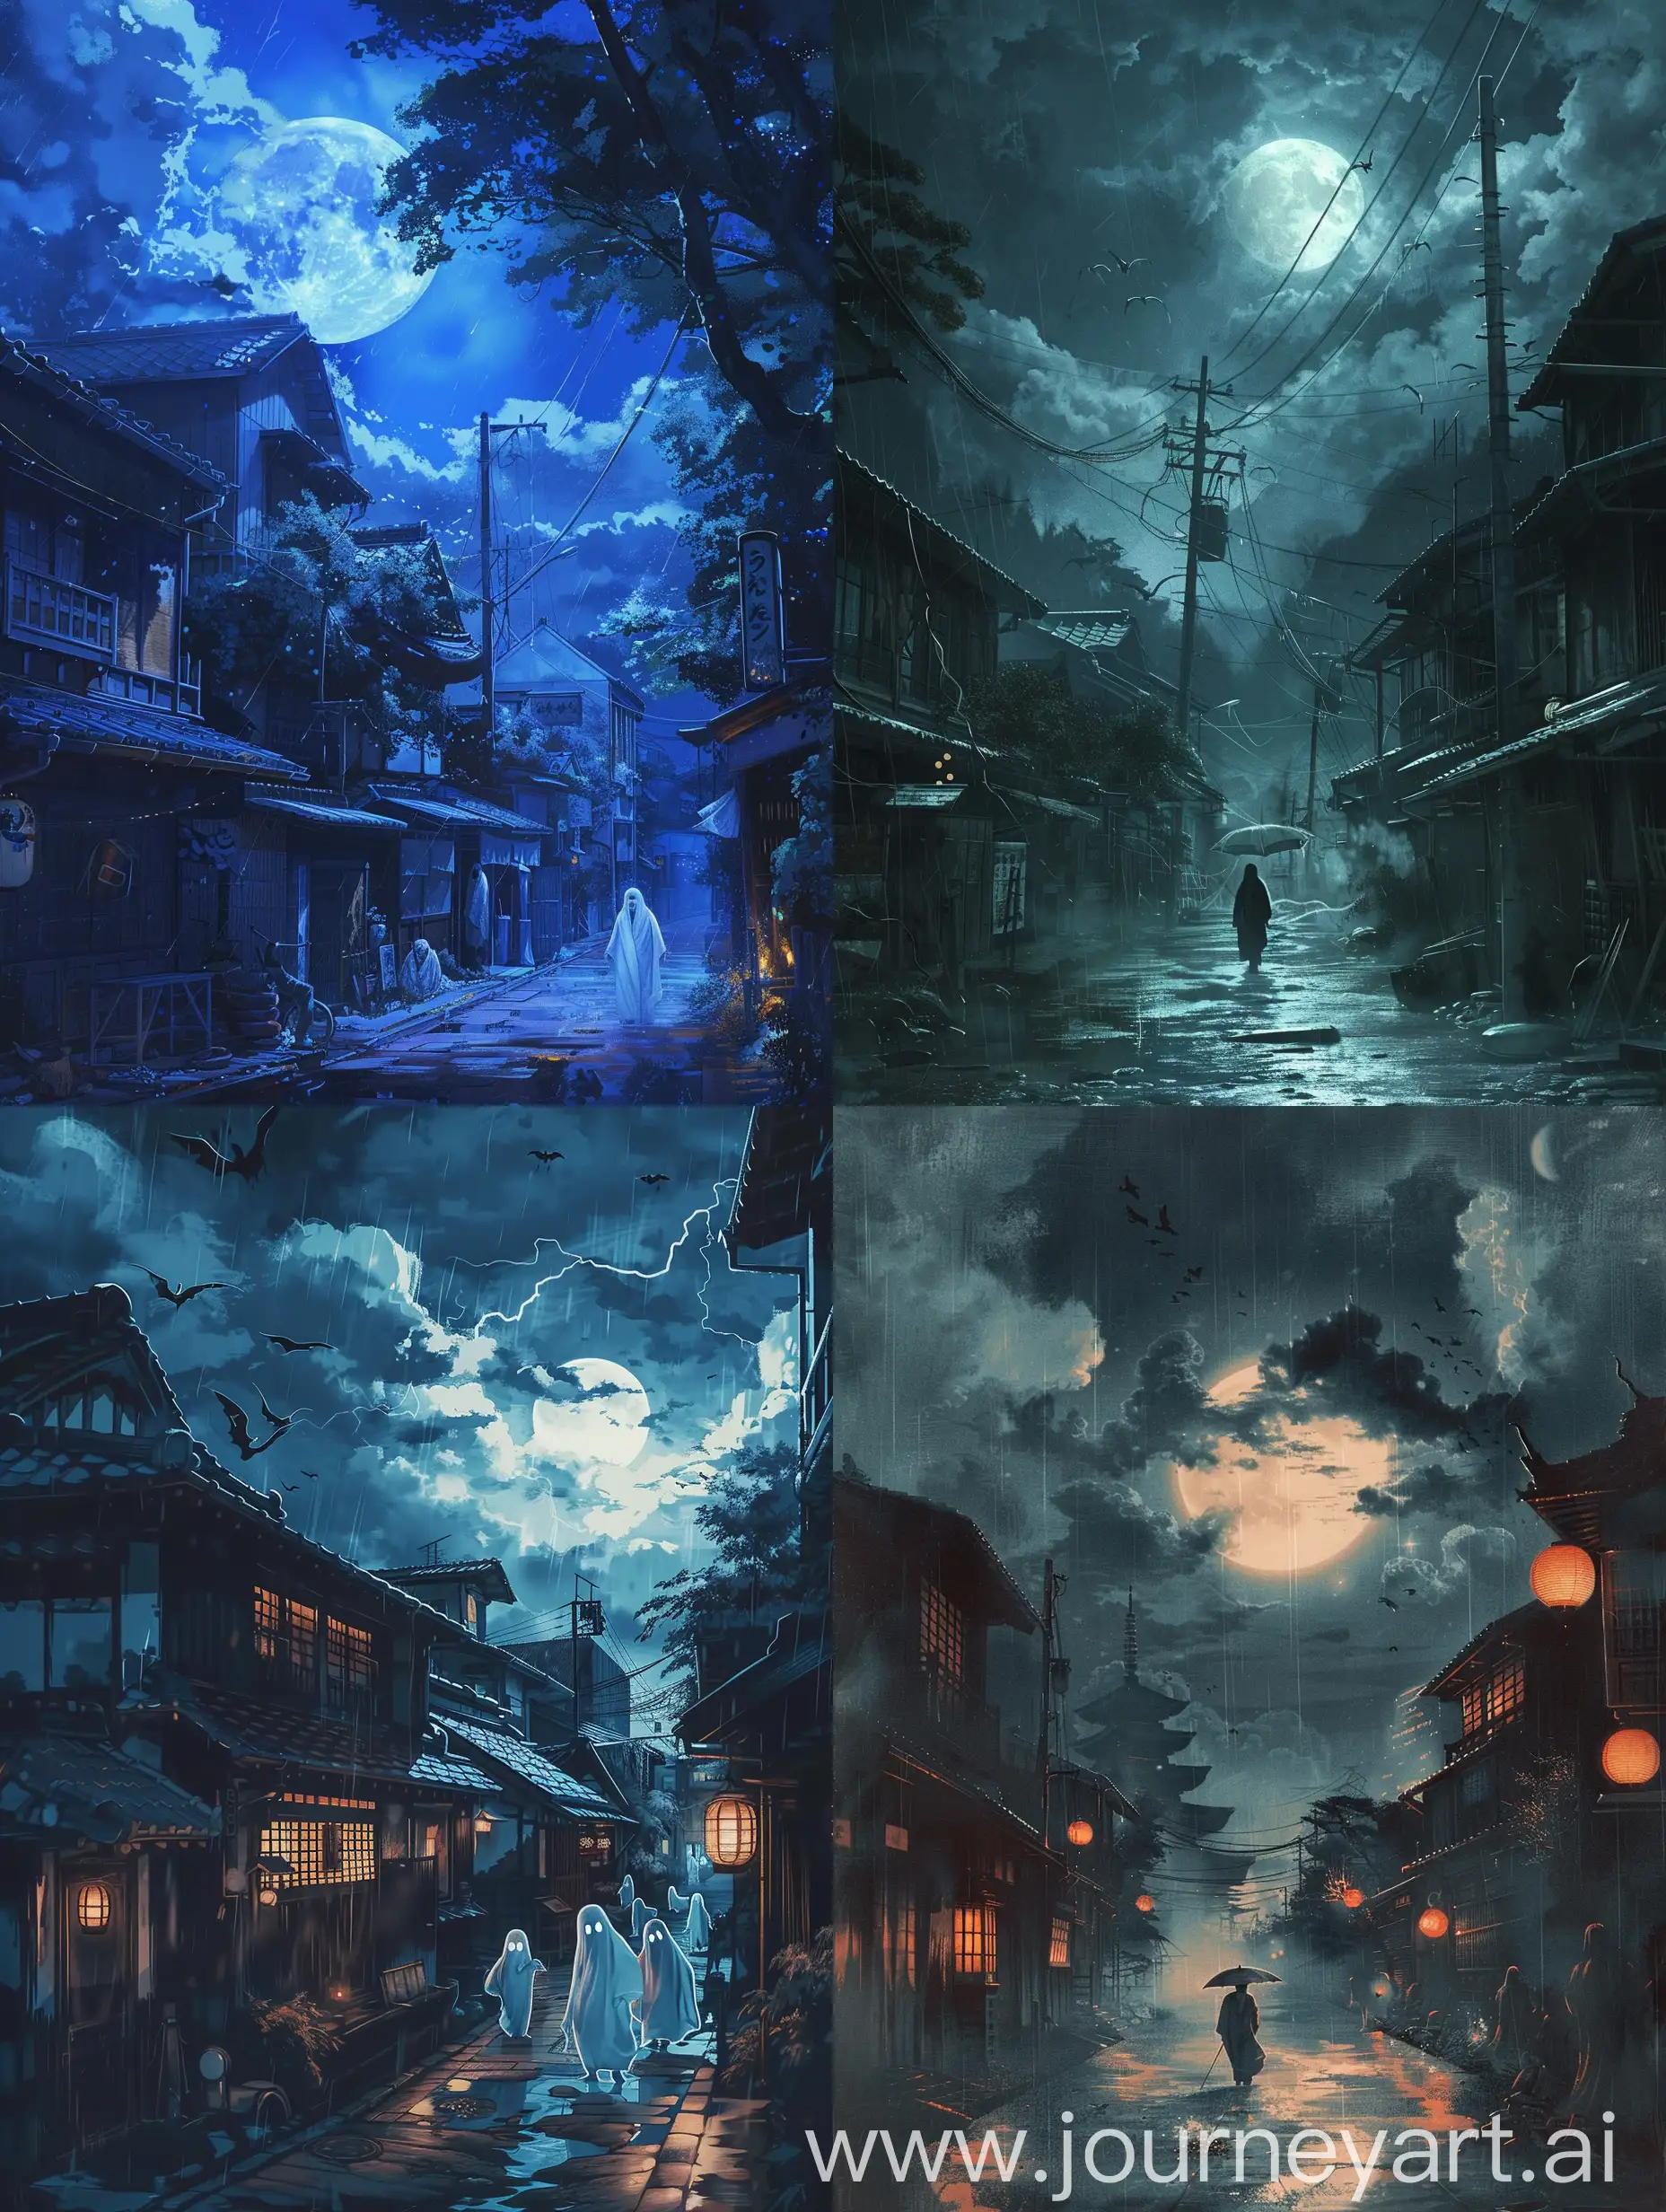 Ethereal-Japanese-Ghosts-Haunting-Tokyos-Moonlit-Streets